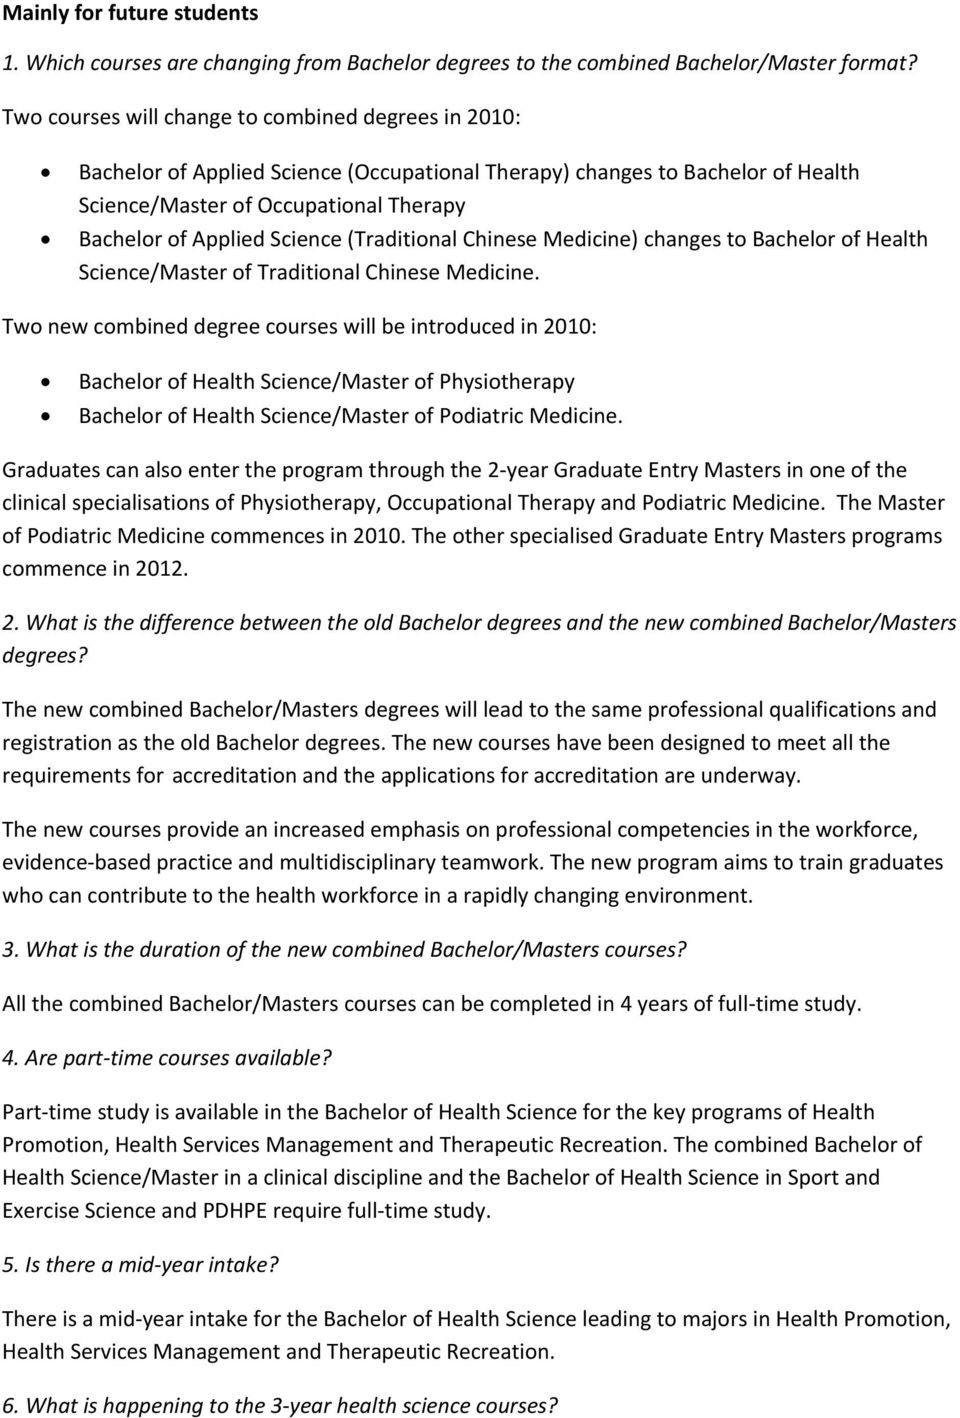 Science (Traditional Chinese Medicine) changes to Bachelor of Health Science/Master of Traditional Chinese Medicine.